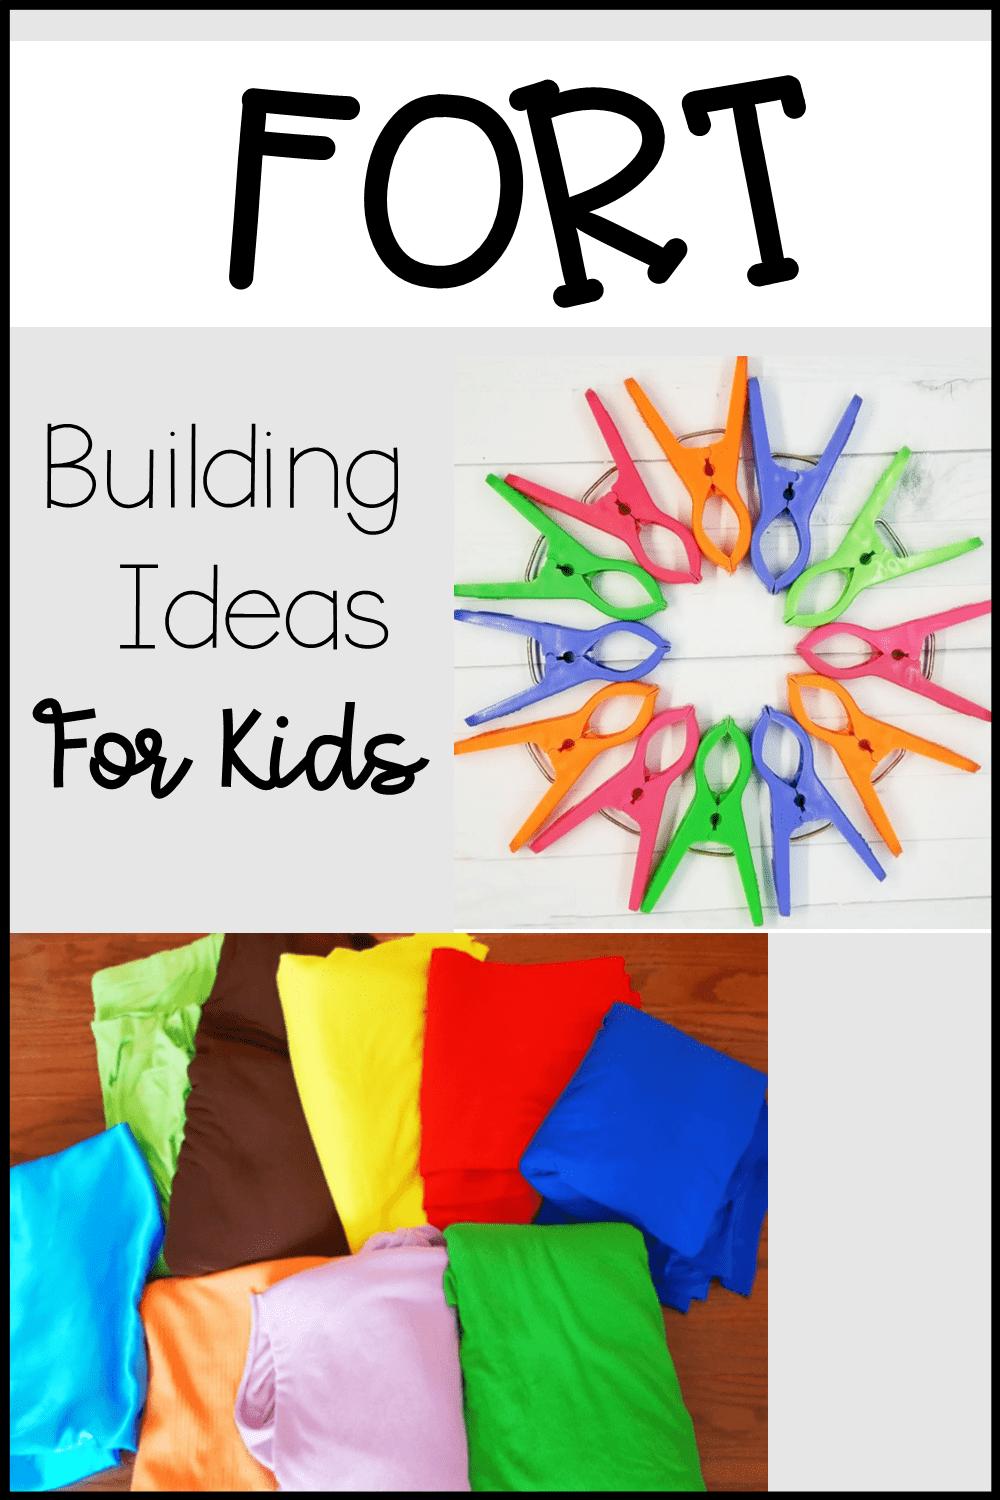 Fort Building Ideas for Kids at Home - Hands-On Teaching Ideas